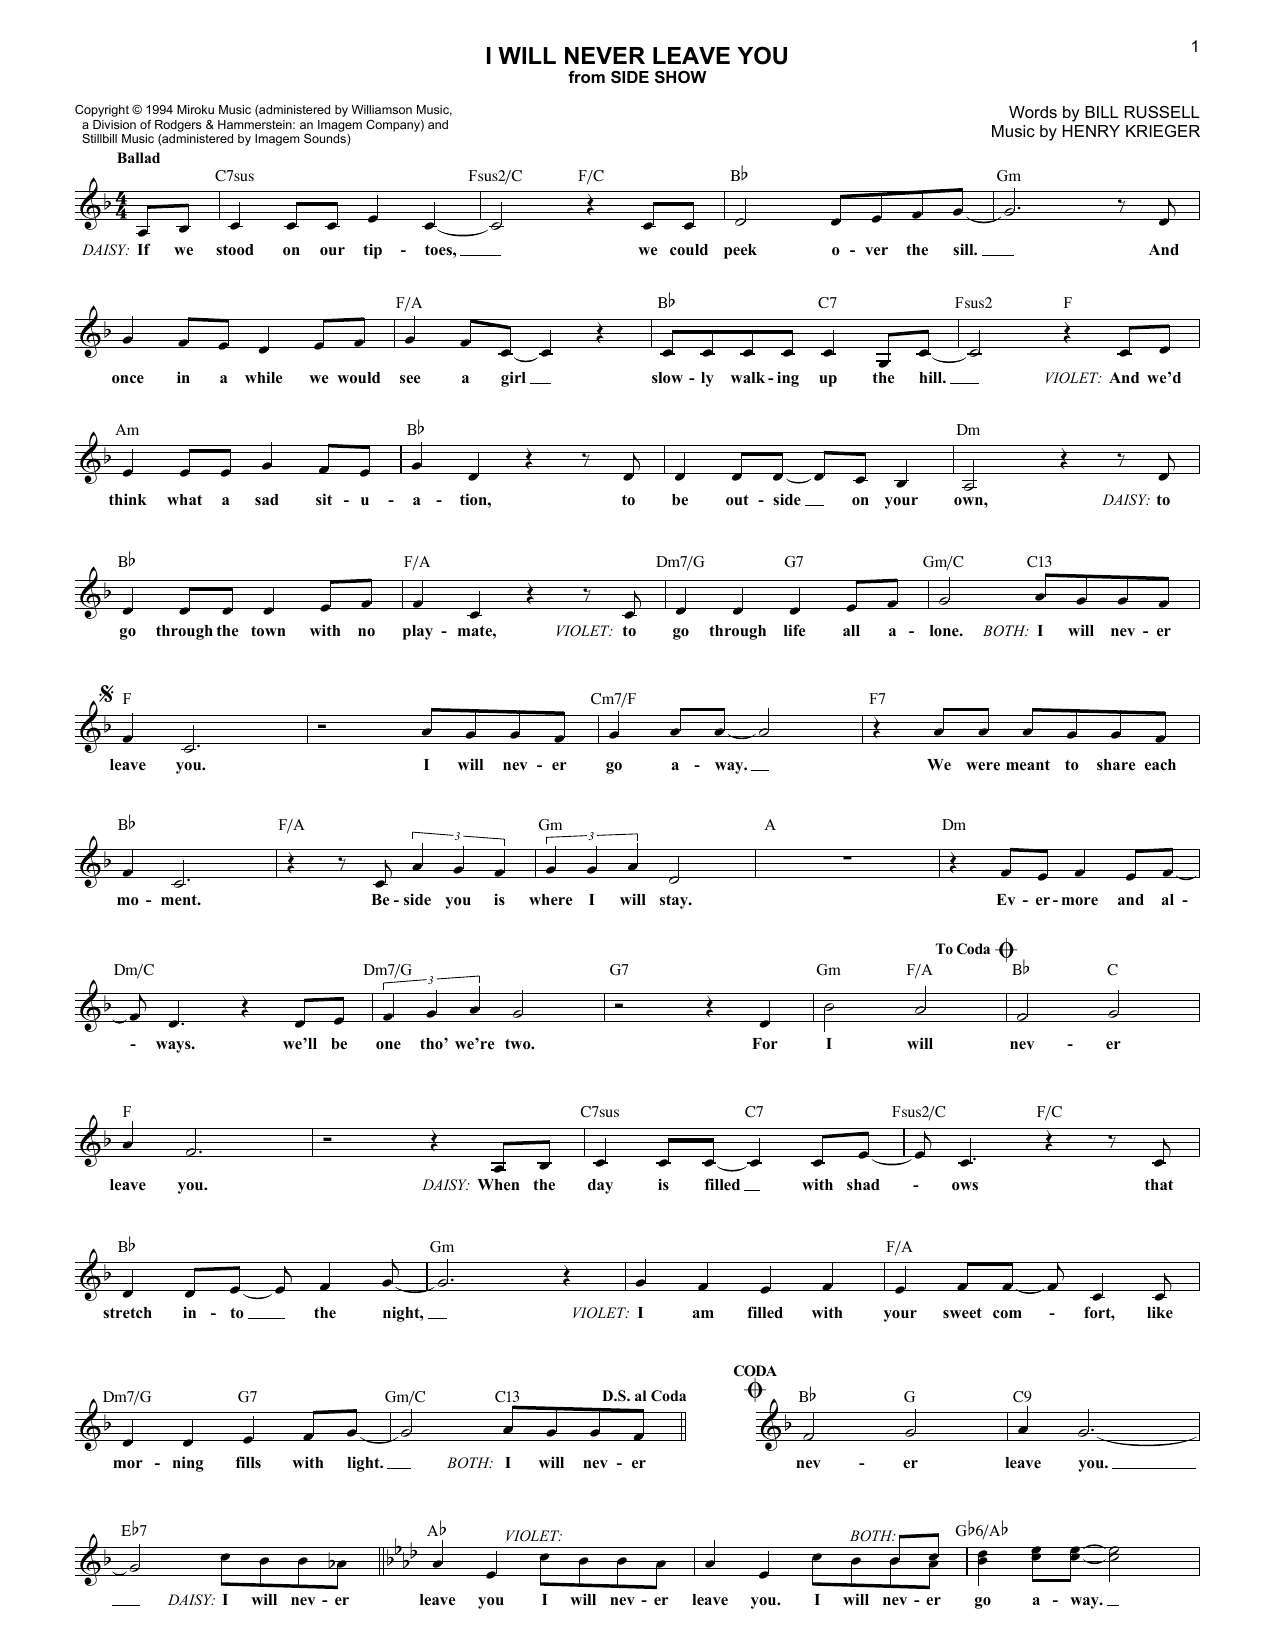 Bill Russell I Will Never Leave You sheet music notes and chords. Download Printable PDF.